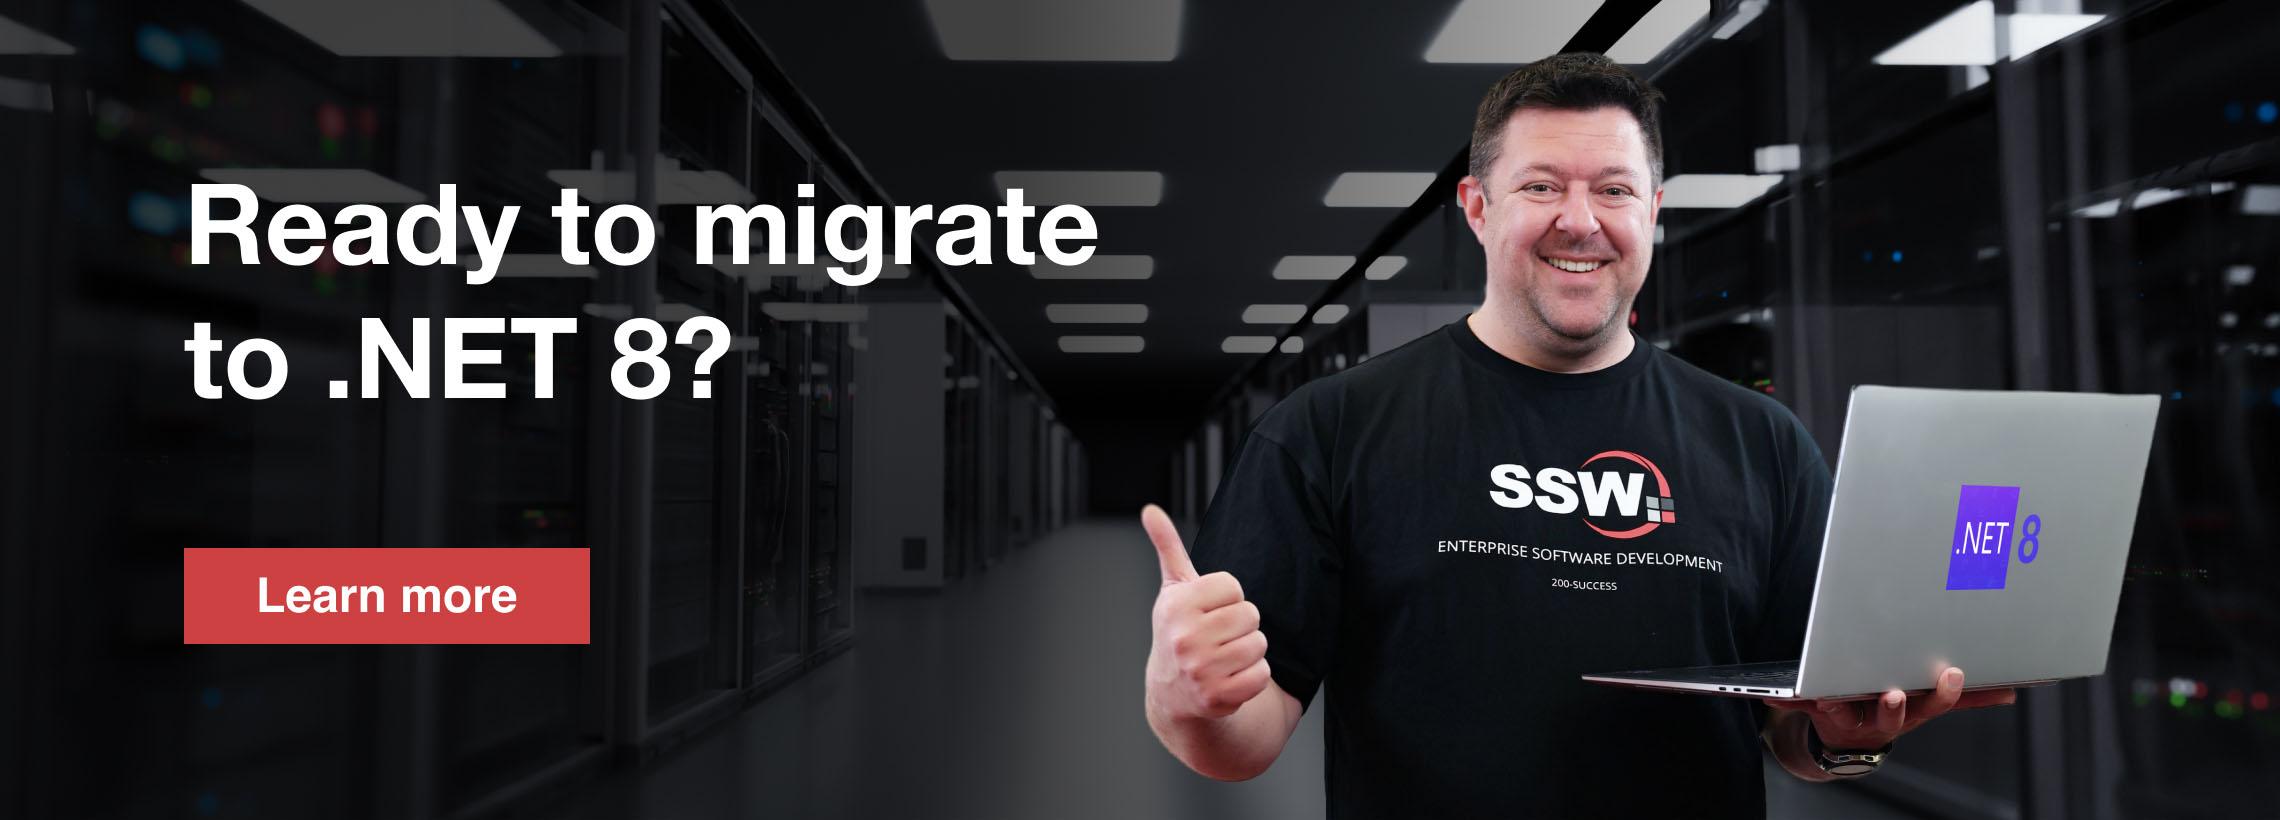 Ready to migrate to .NET 8?